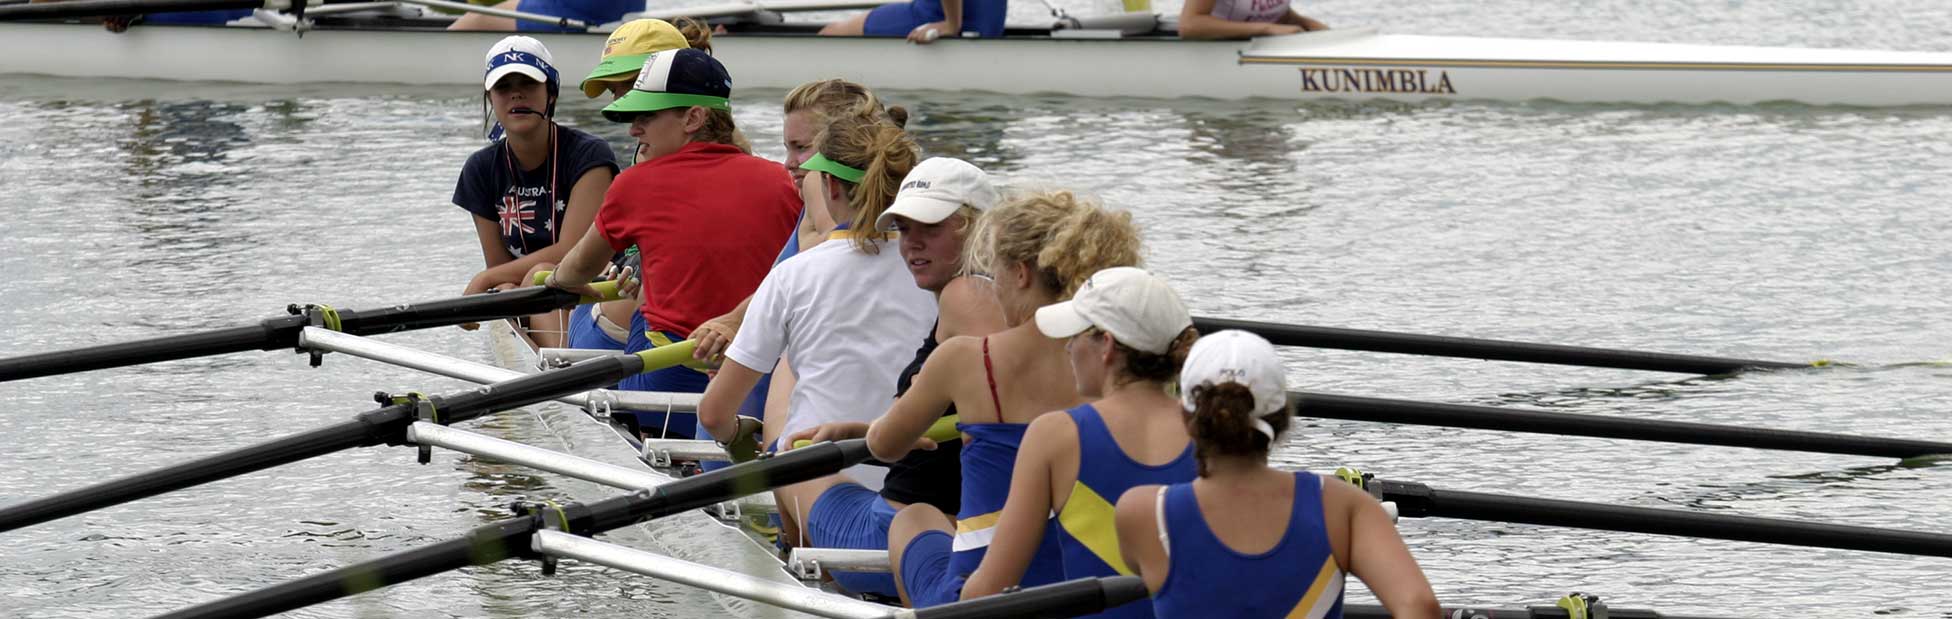 Female teams boarding vessel to compete